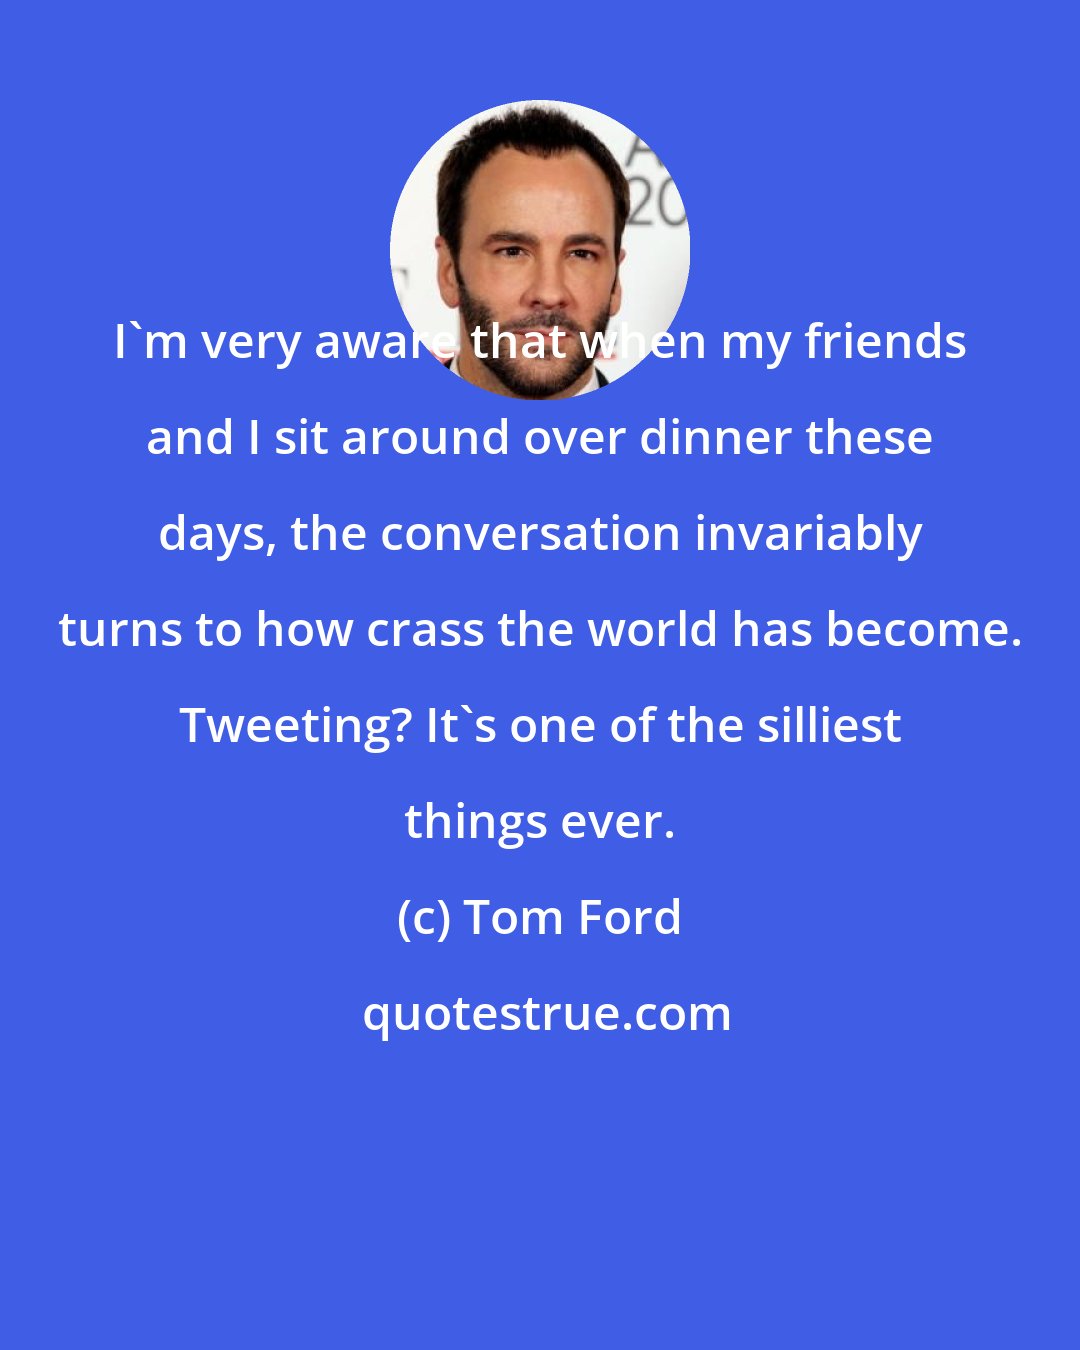 Tom Ford: I'm very aware that when my friends and I sit around over dinner these days, the conversation invariably turns to how crass the world has become. Tweeting? It's one of the silliest things ever.